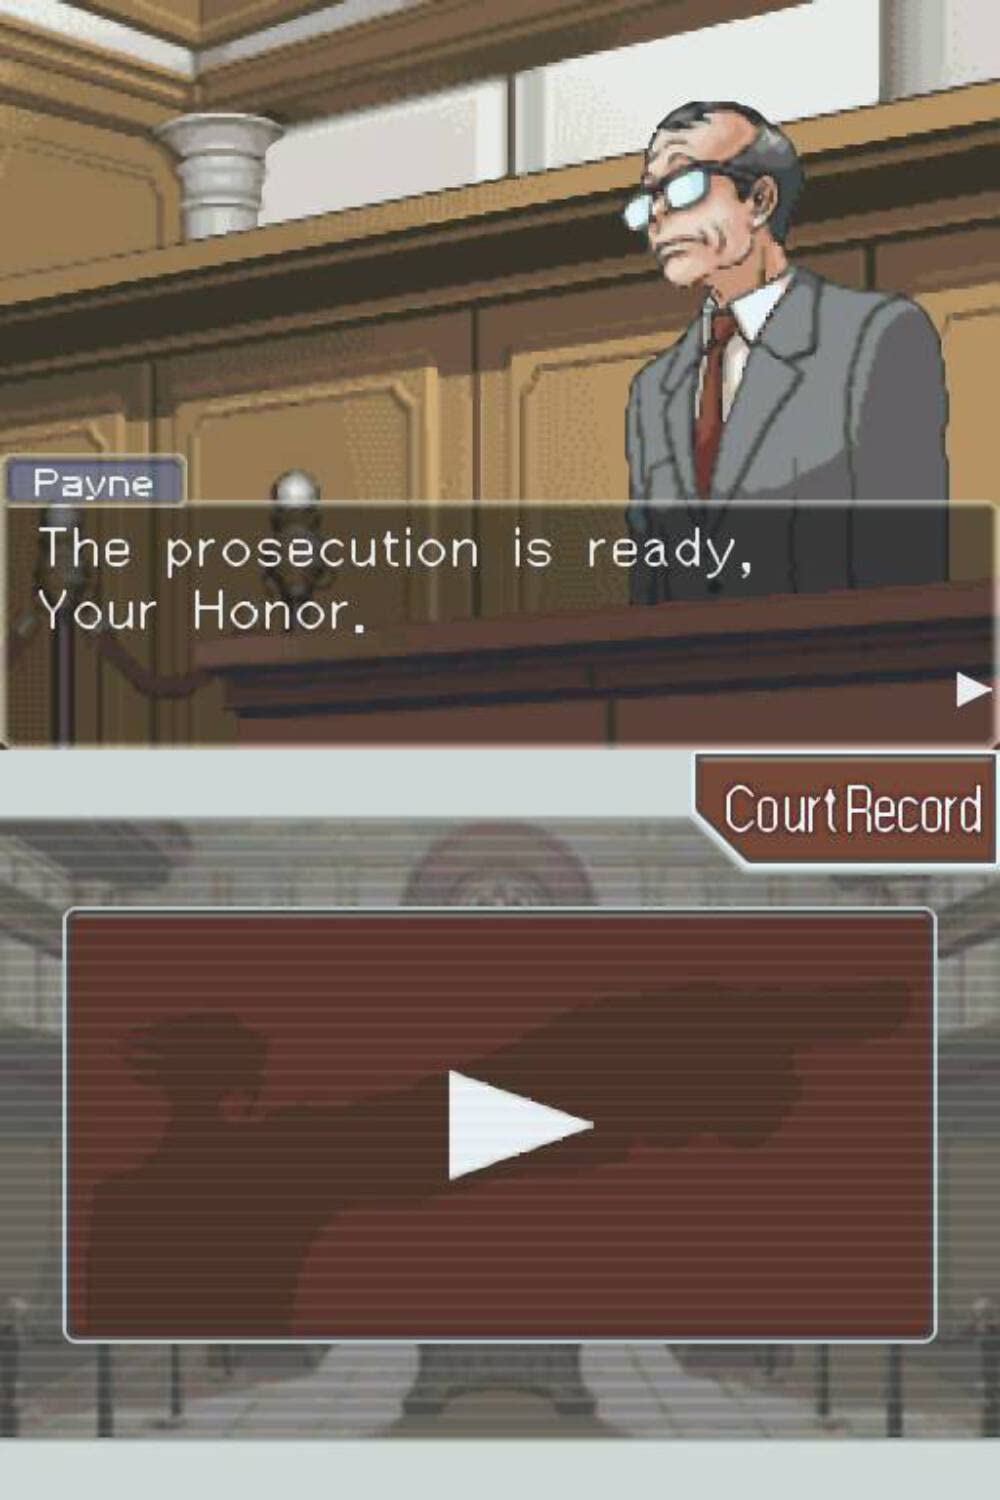 Phoenix Wright: Ace Attorney NDS - image 5 of 7